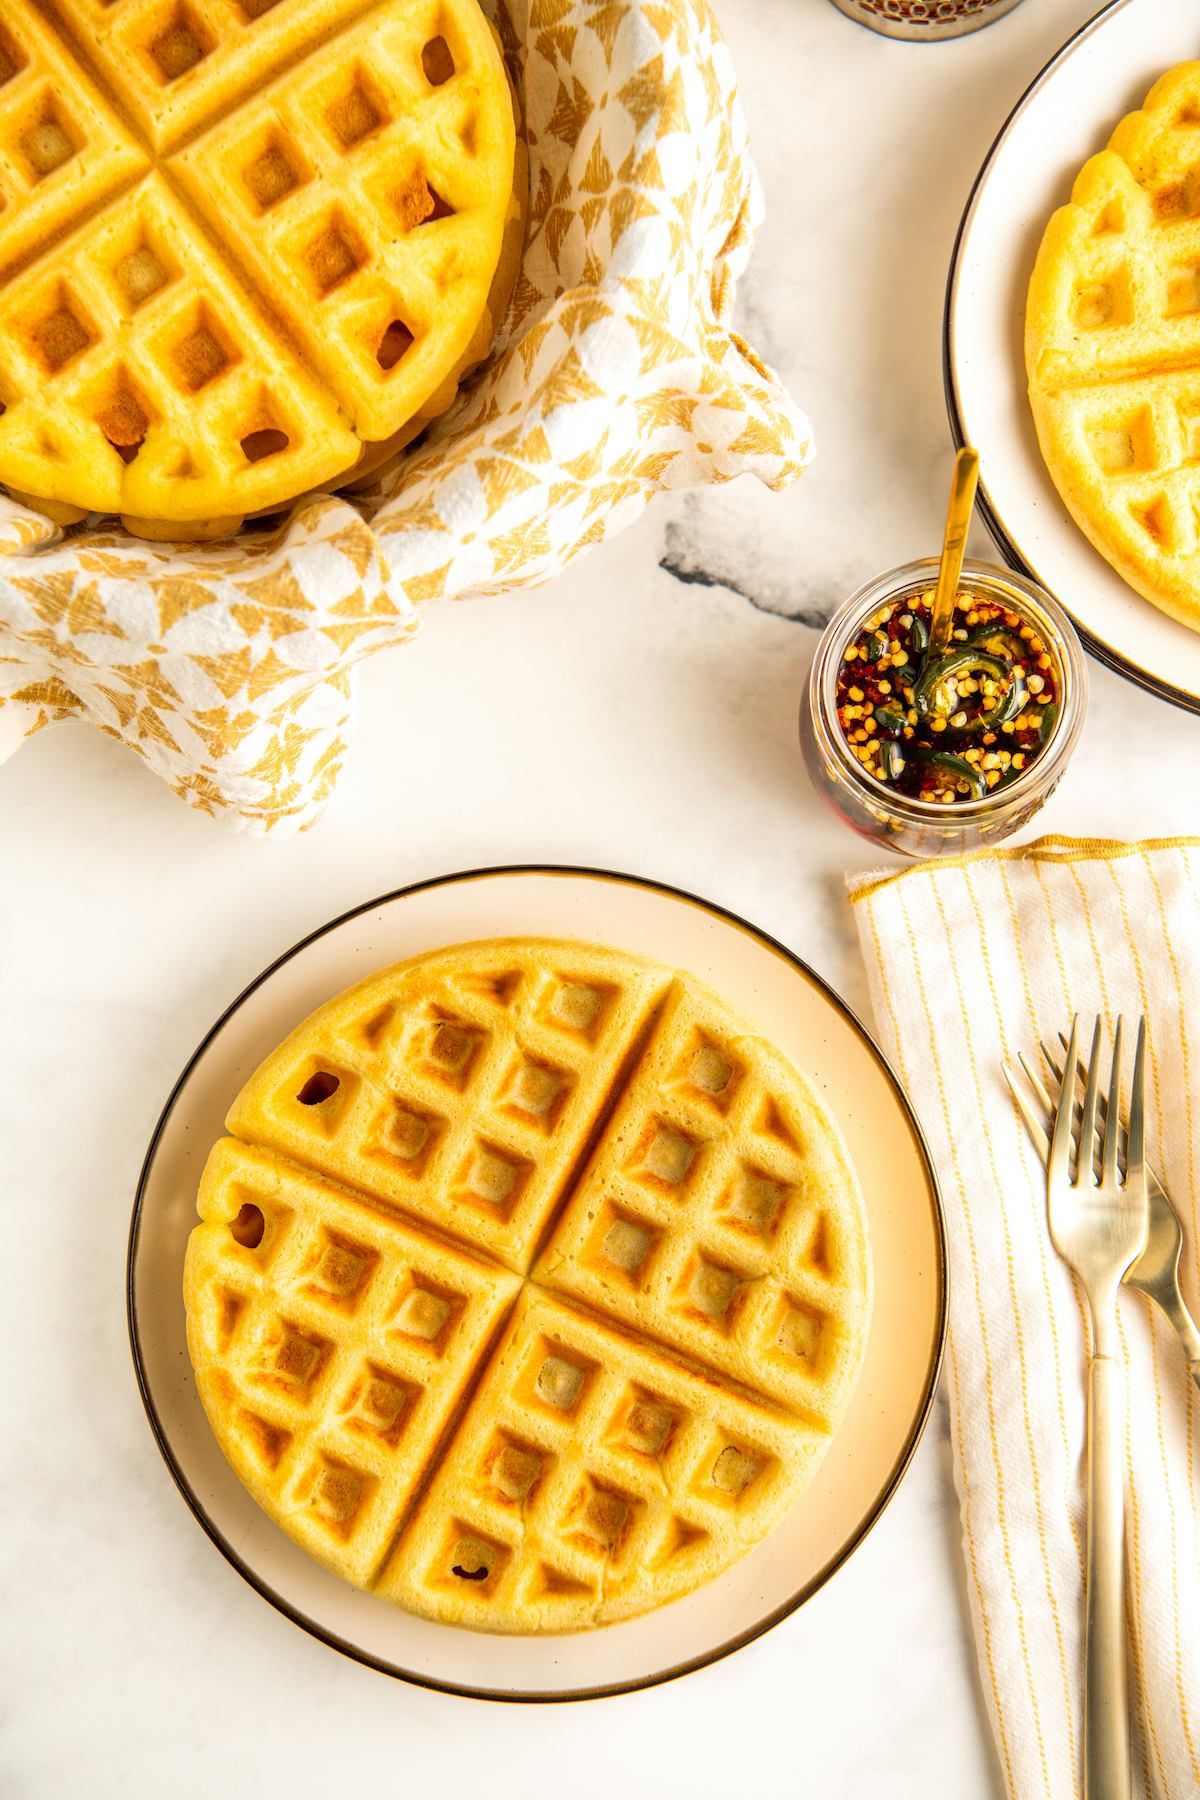 Warm cornbread waffles stacked on plates with a bowl of hot honey on the side.